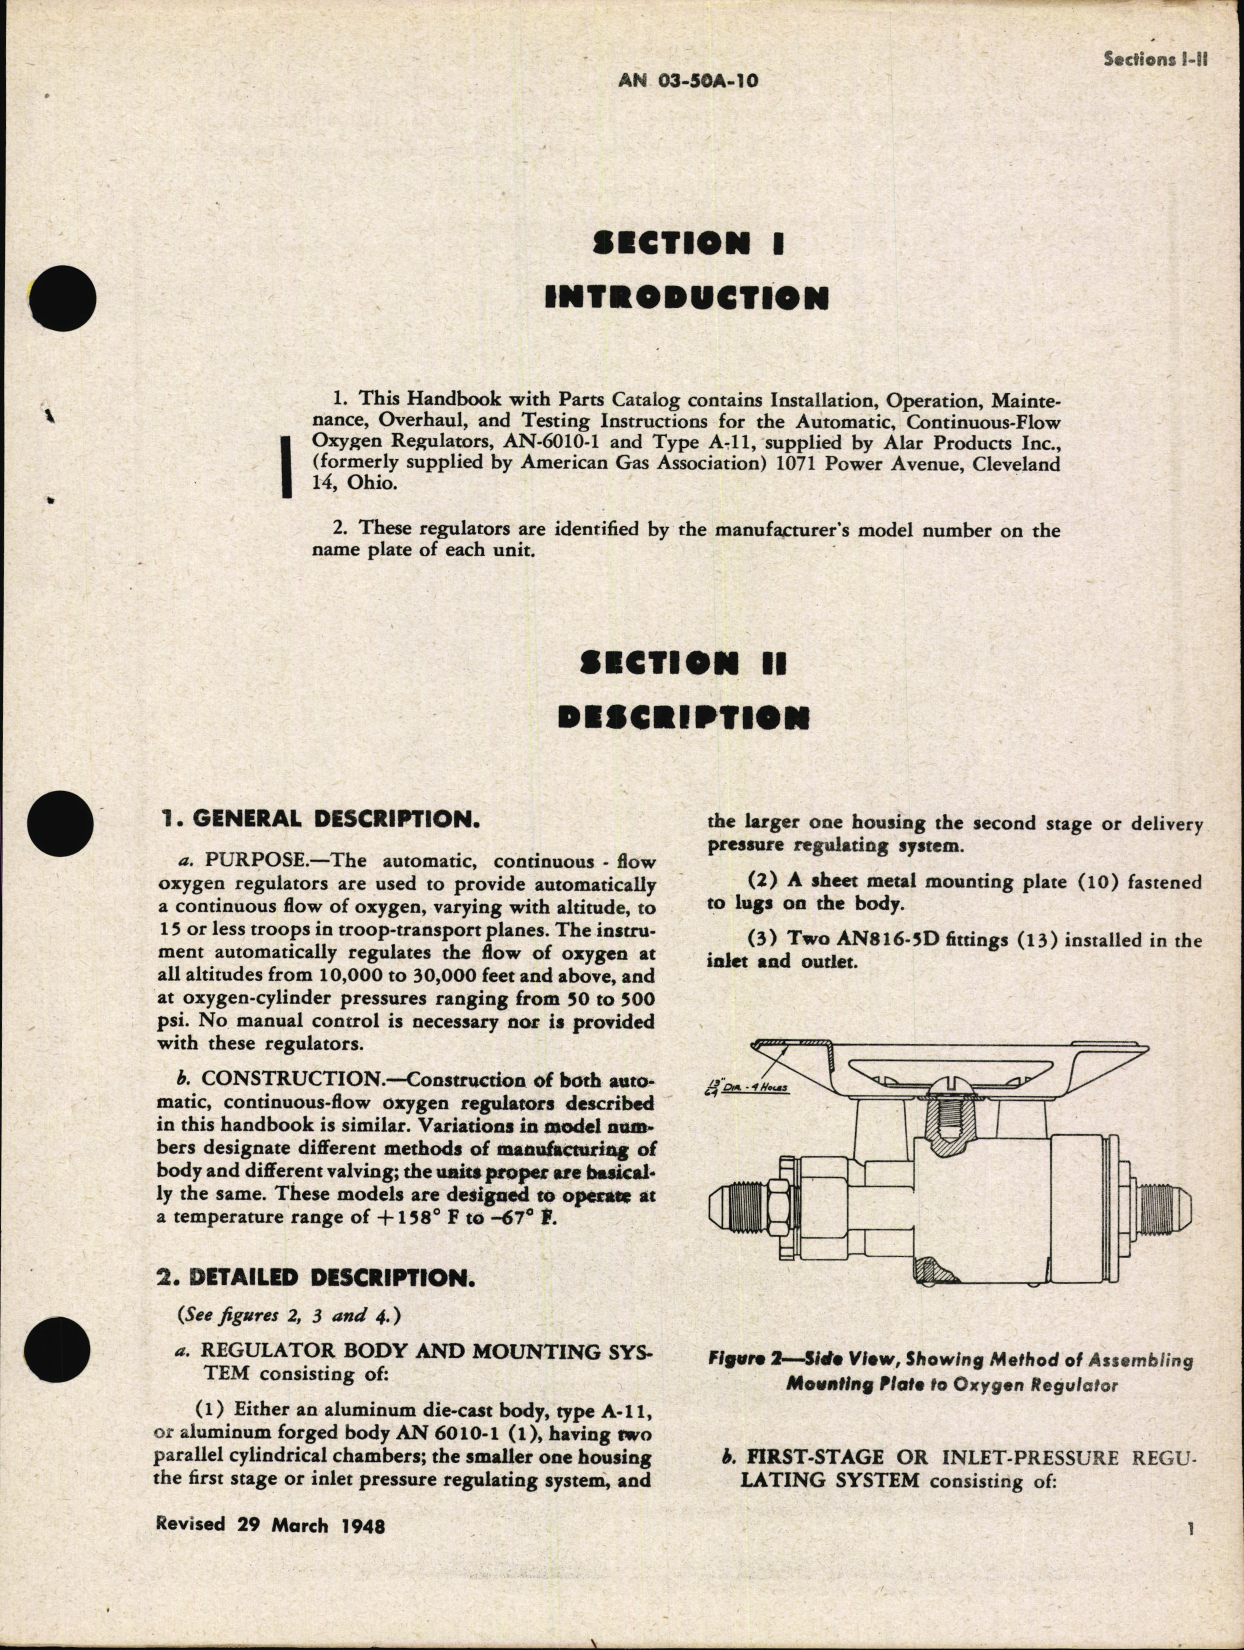 Sample page 3 from AirCorps Library document: Handbook of Operation, Service, and Overhaul Instructions with Parts Catalog for Oxygen Regulators